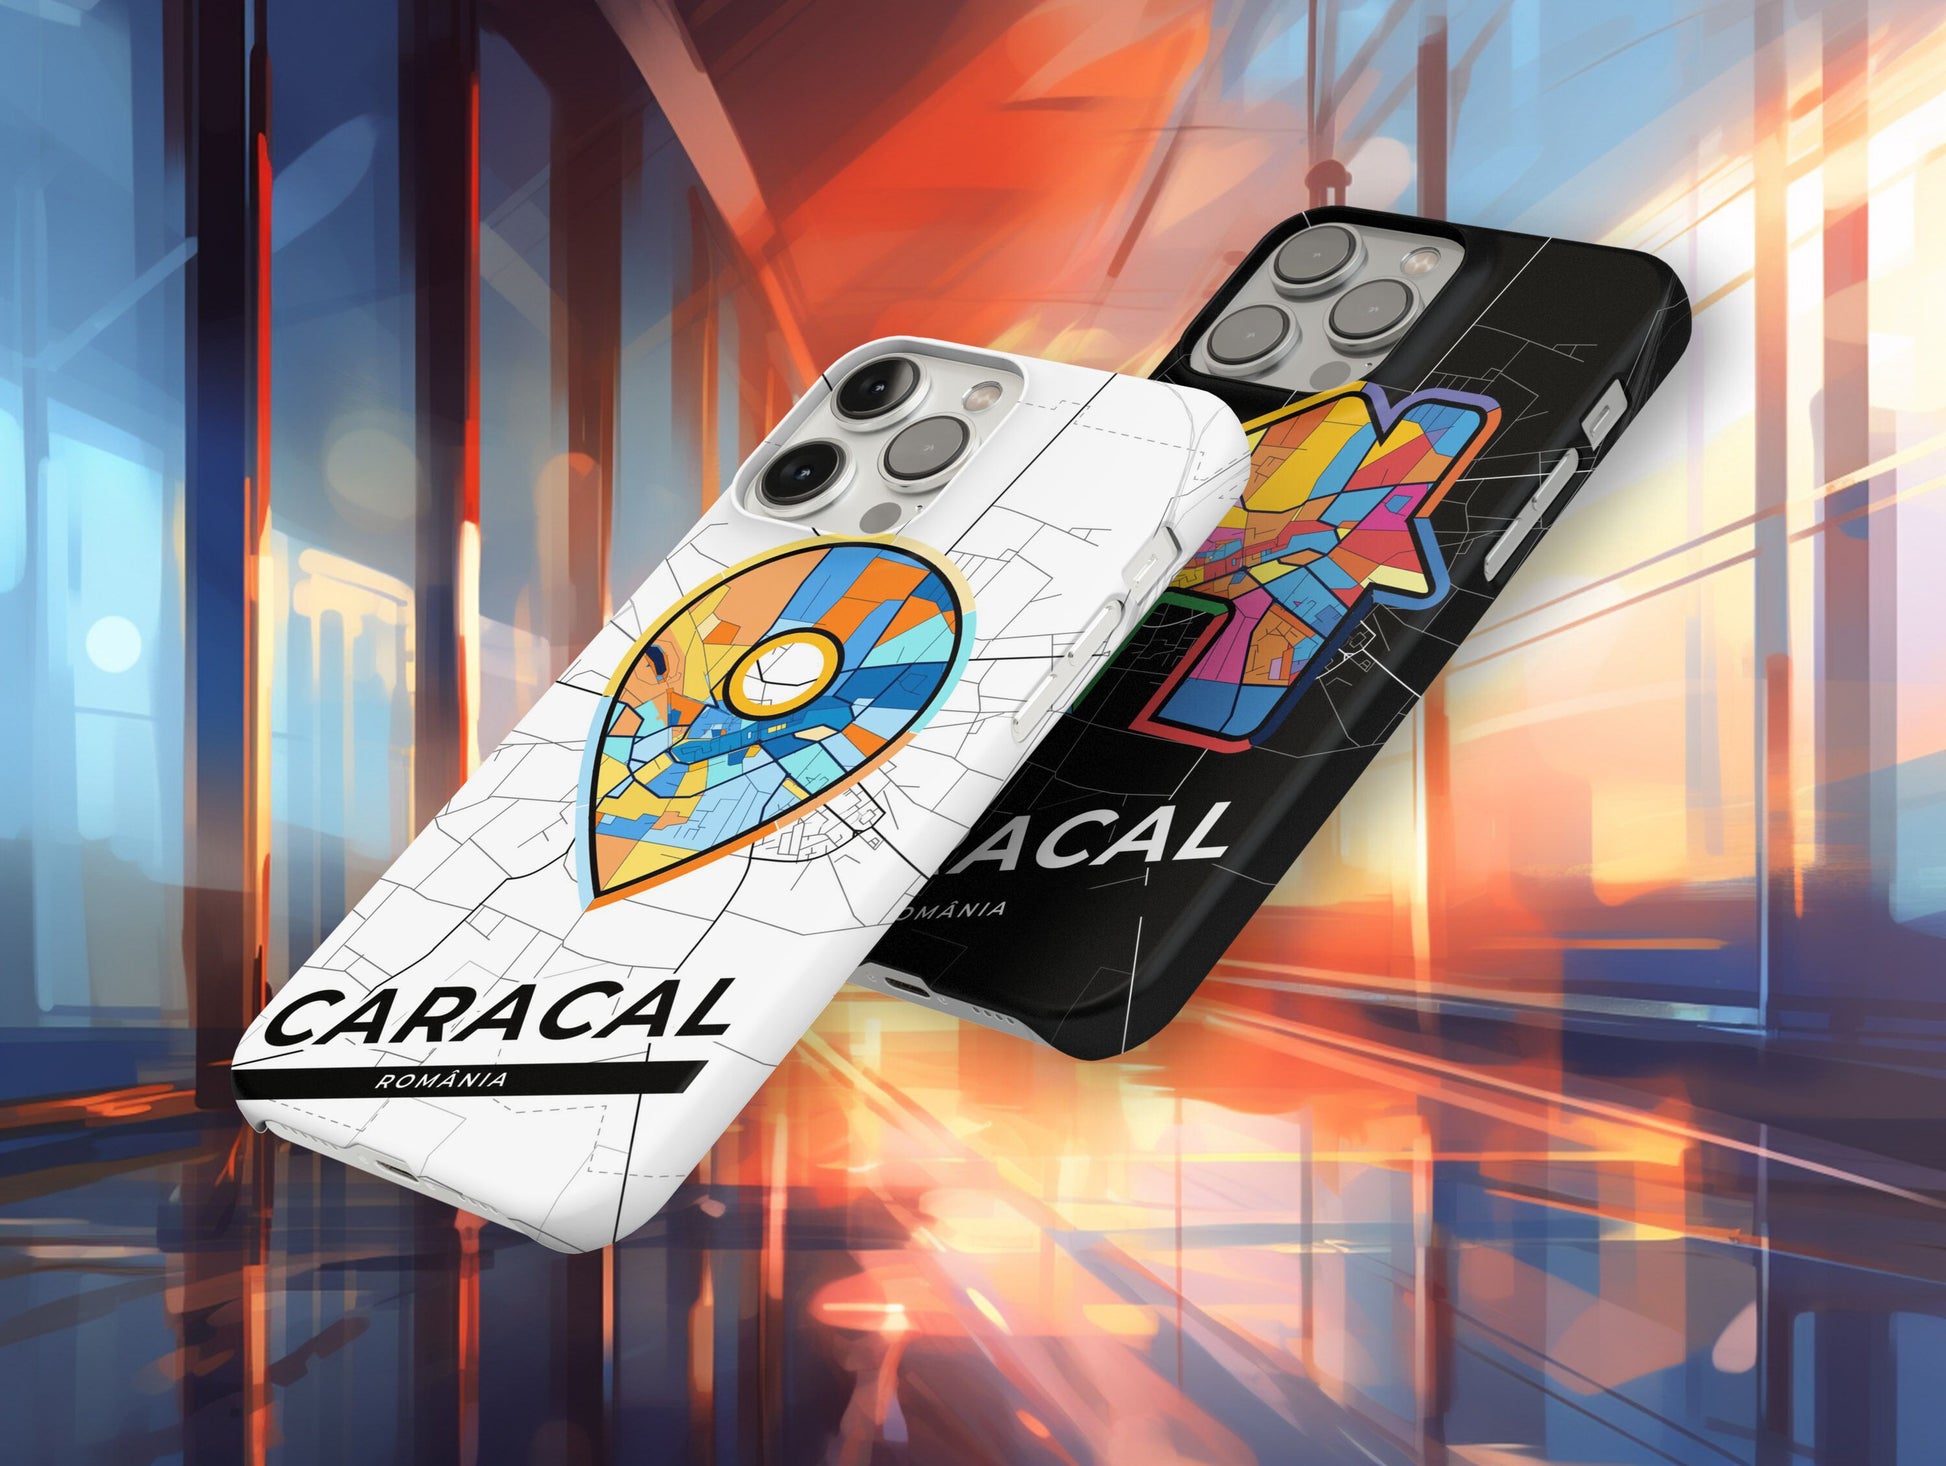 Caracal Romania slim phone case with colorful icon. Birthday, wedding or housewarming gift. Couple match cases.